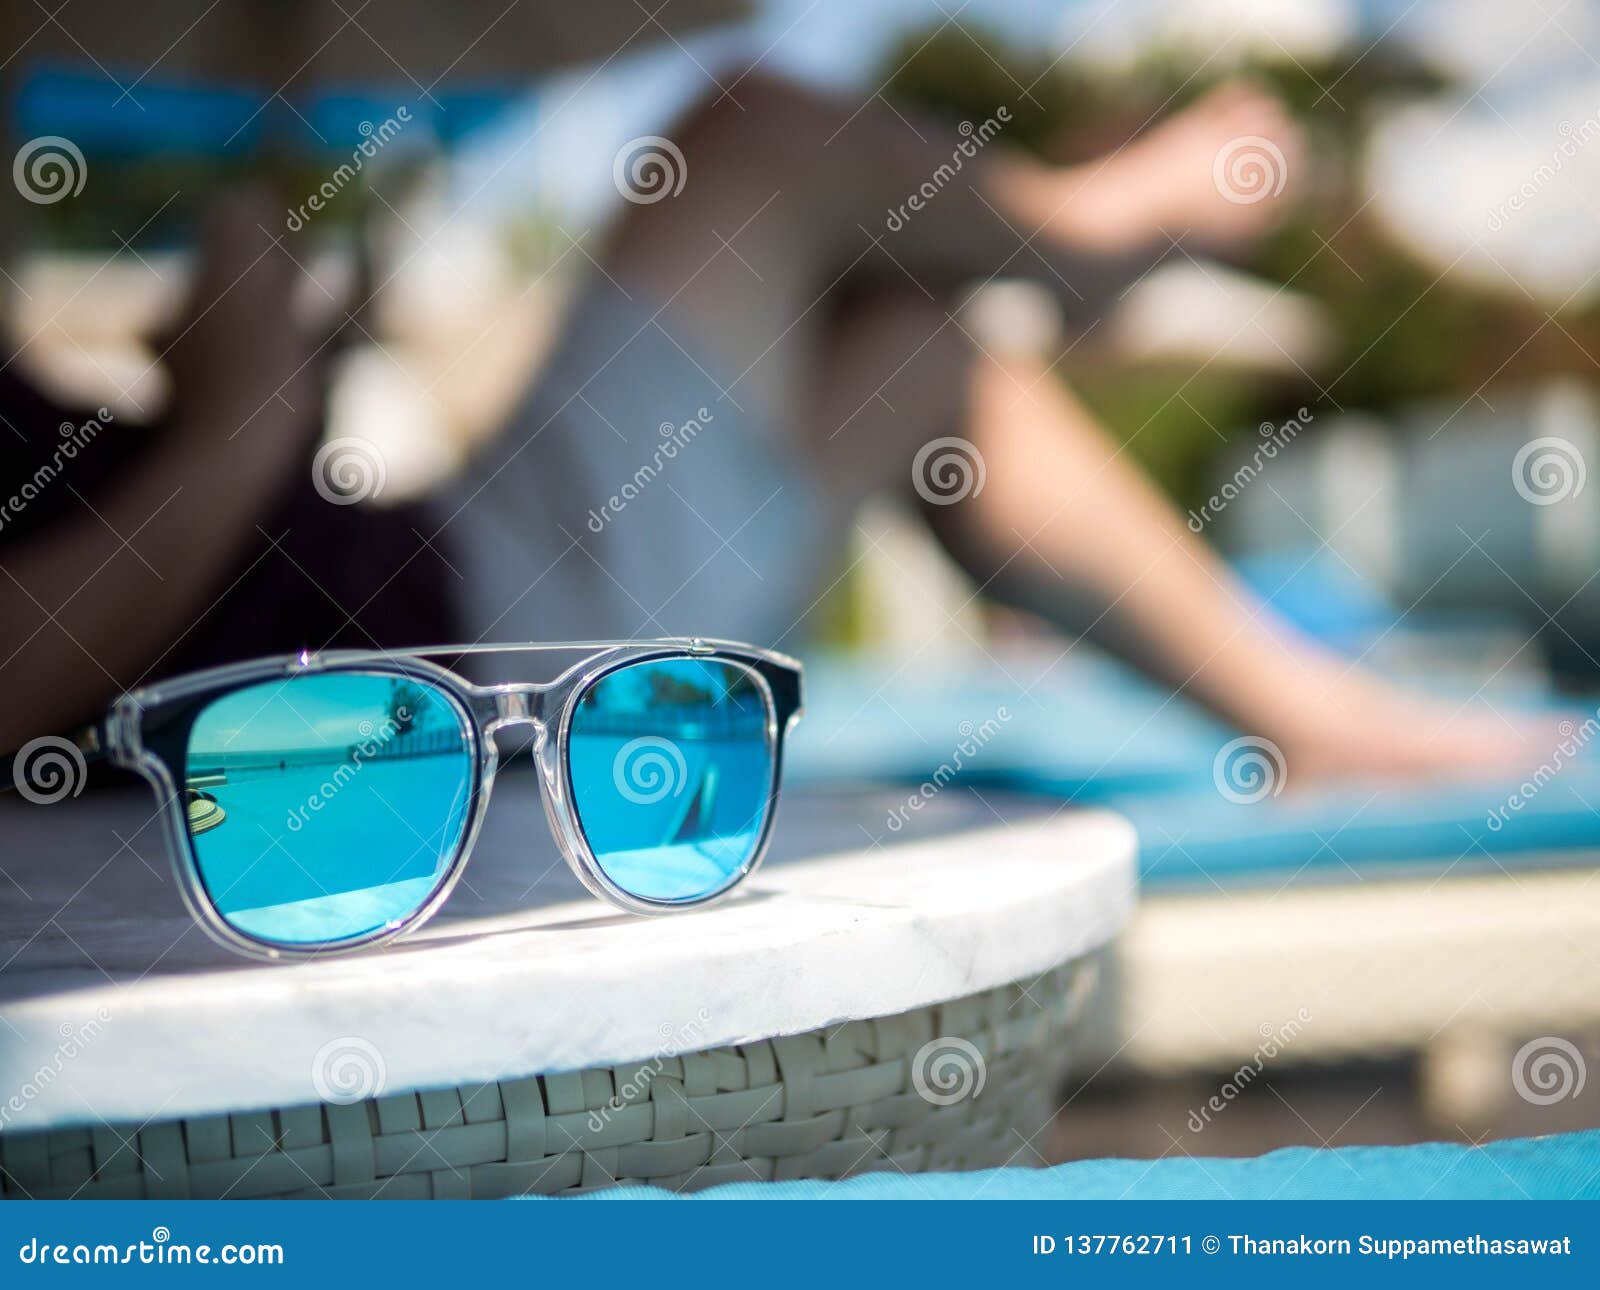 Sunglasses, Men`s Legs Resting in a Swimming Pool Background